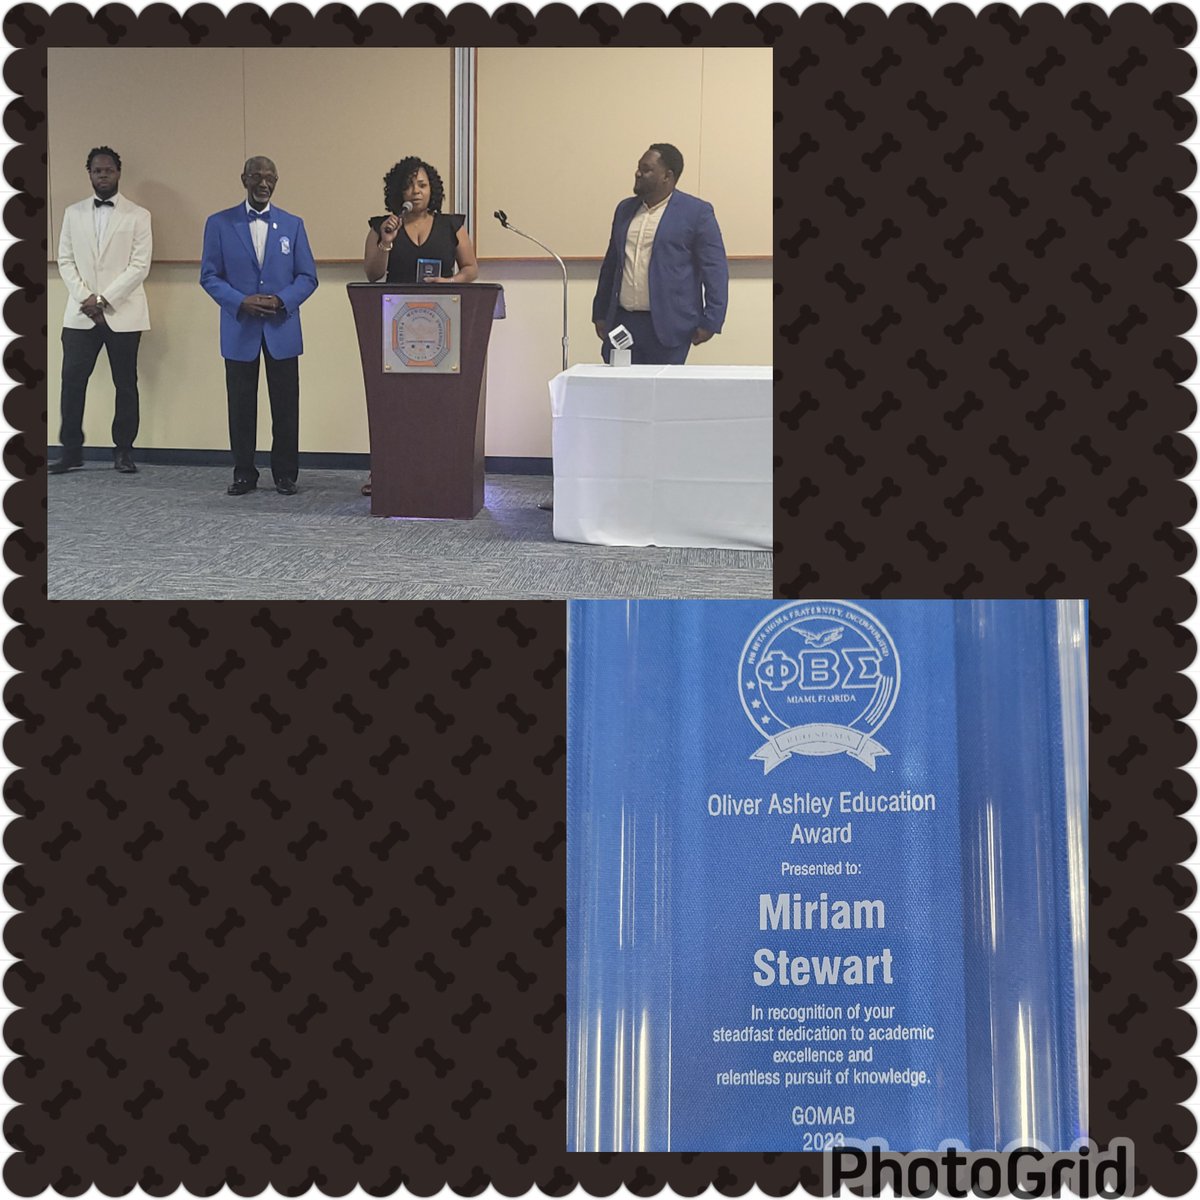 Thank you to the men of the Rho Sigma Chapter of Phi Beta Sigma for inviting me to the annual Crescent Awards! I'm humbled and honored to be recognized and to receive the Oliver Ashley Education Award tonight. 💚🩶💚🩶 #PioneerPride @NMSPIONEERS